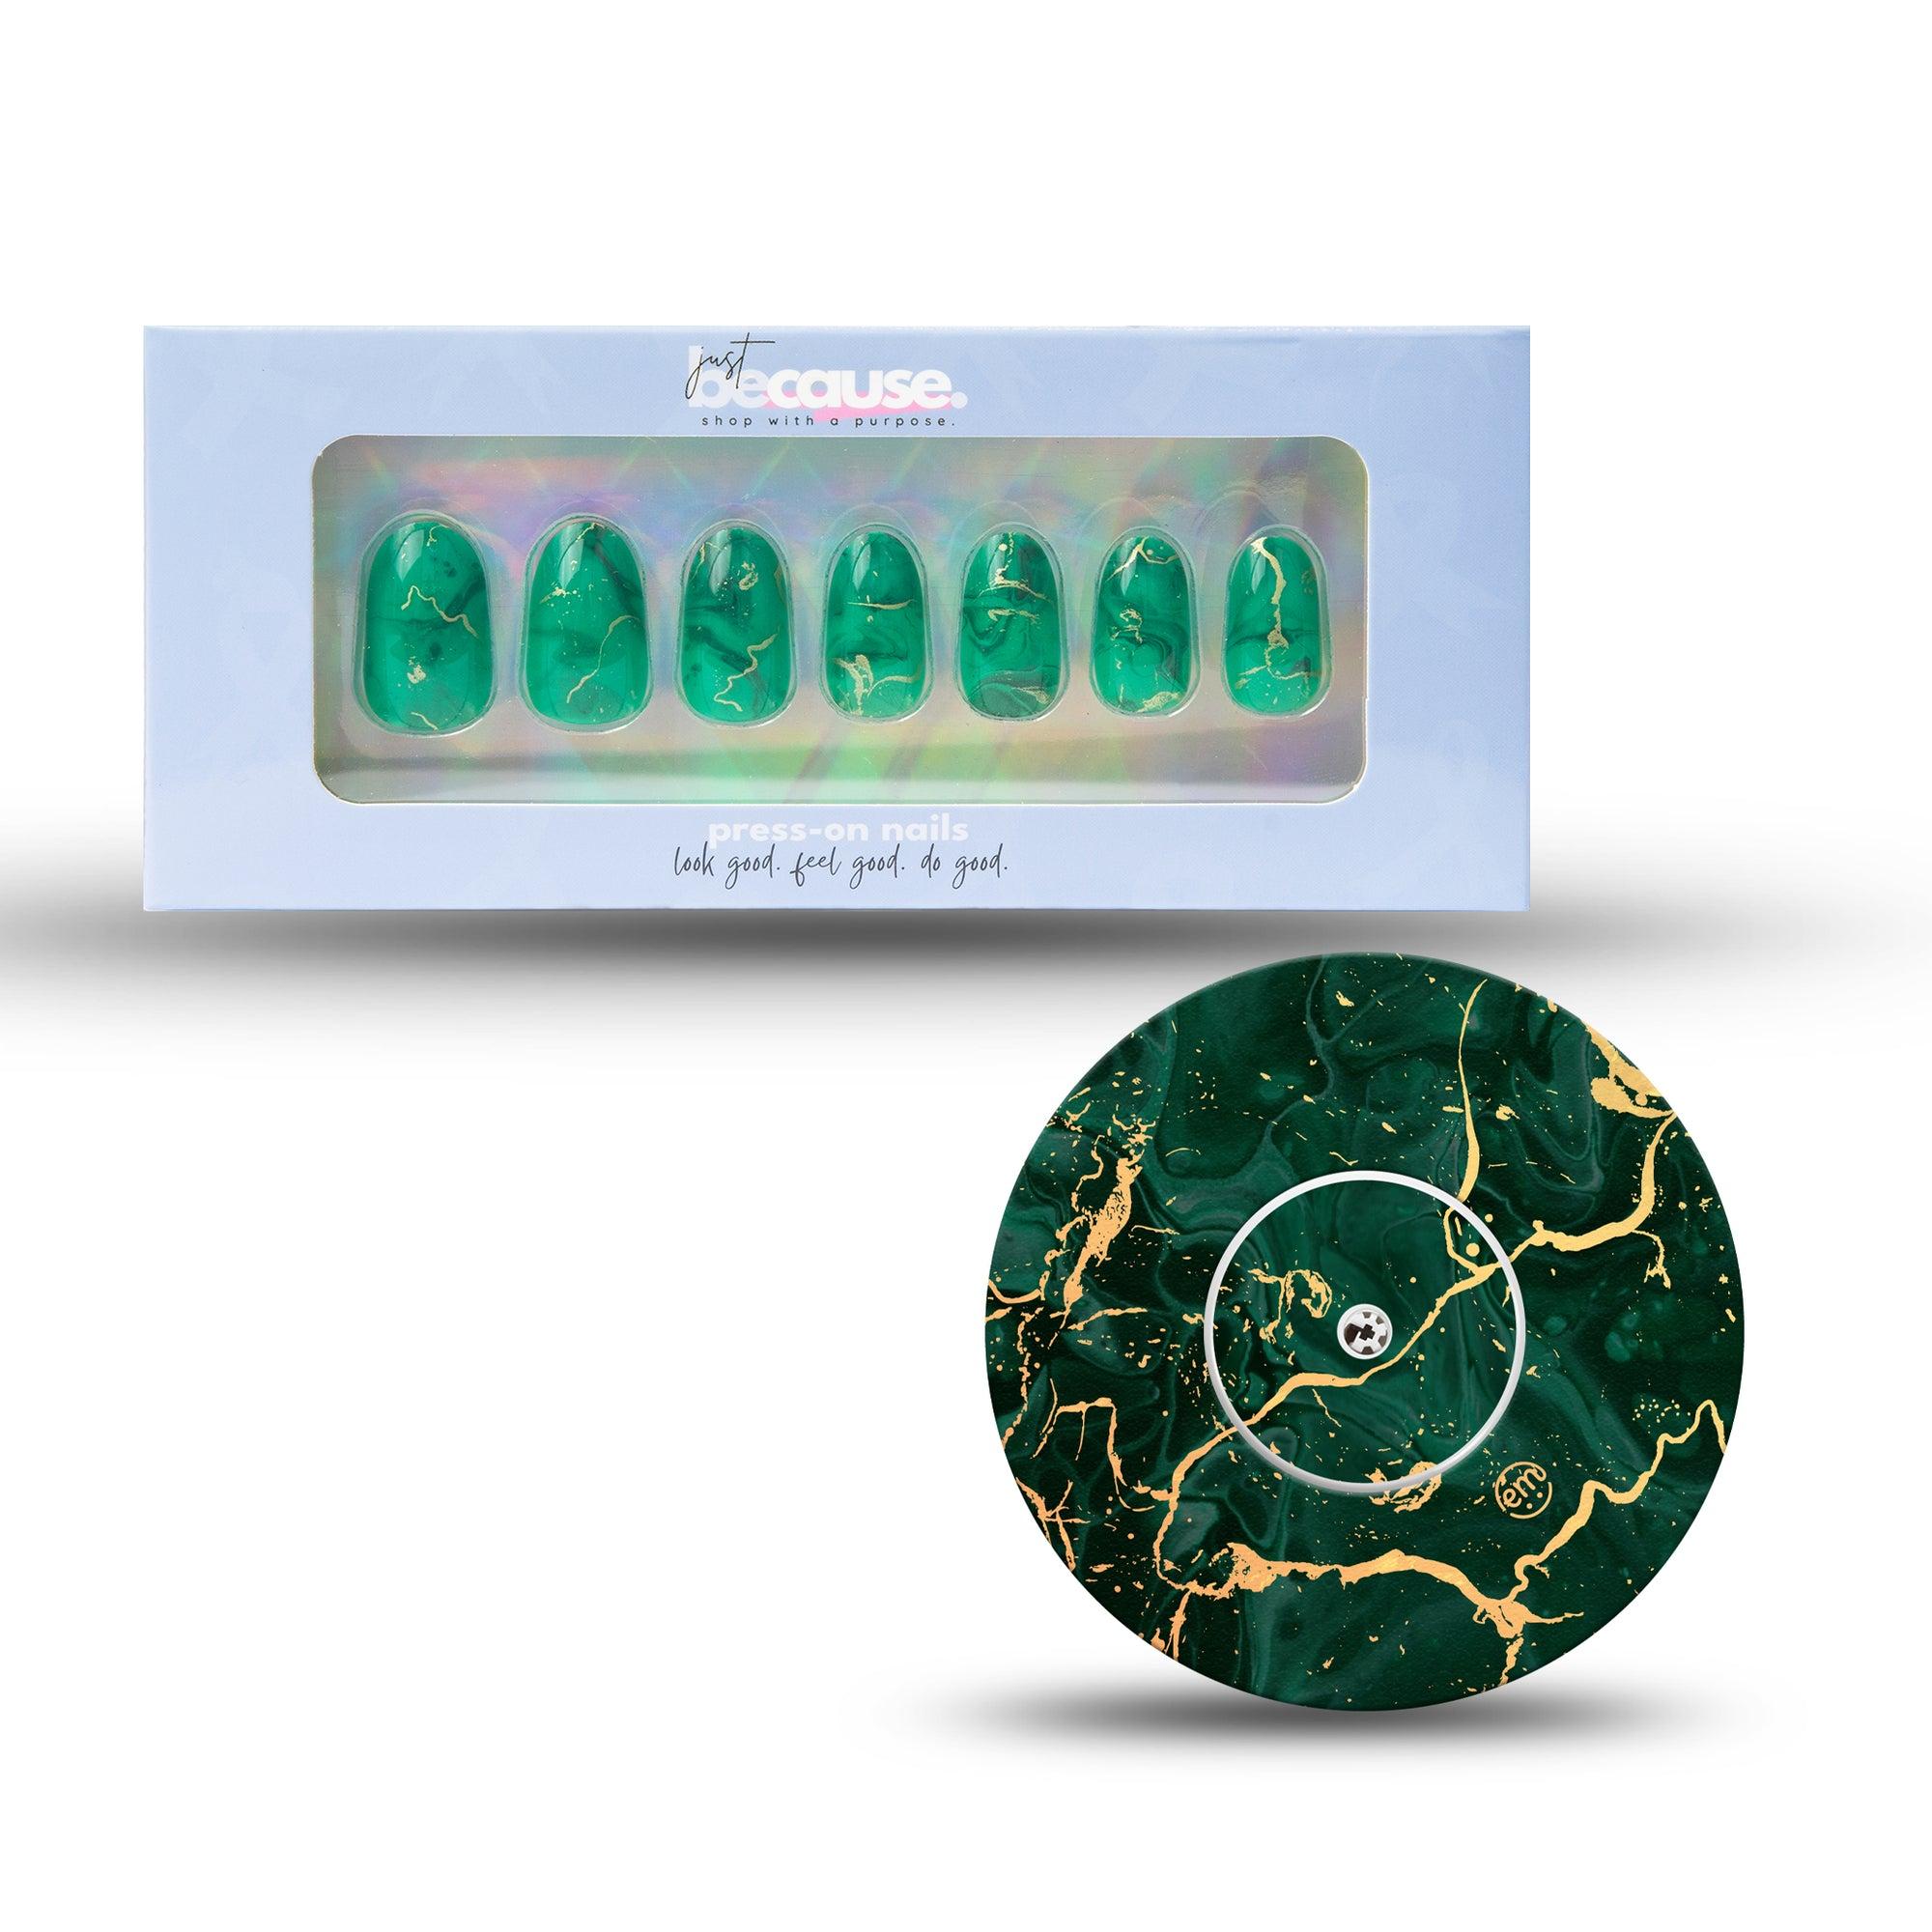 ExpressionMed Just BeCause 24 Pcs ABS Press on nails Medium, Green & Gold Marble Fake Nails set with matching Green & Gold Marble Libre 2 Adhesive Tape and Center Sticker, Support T1D - ExpressionMed.com	